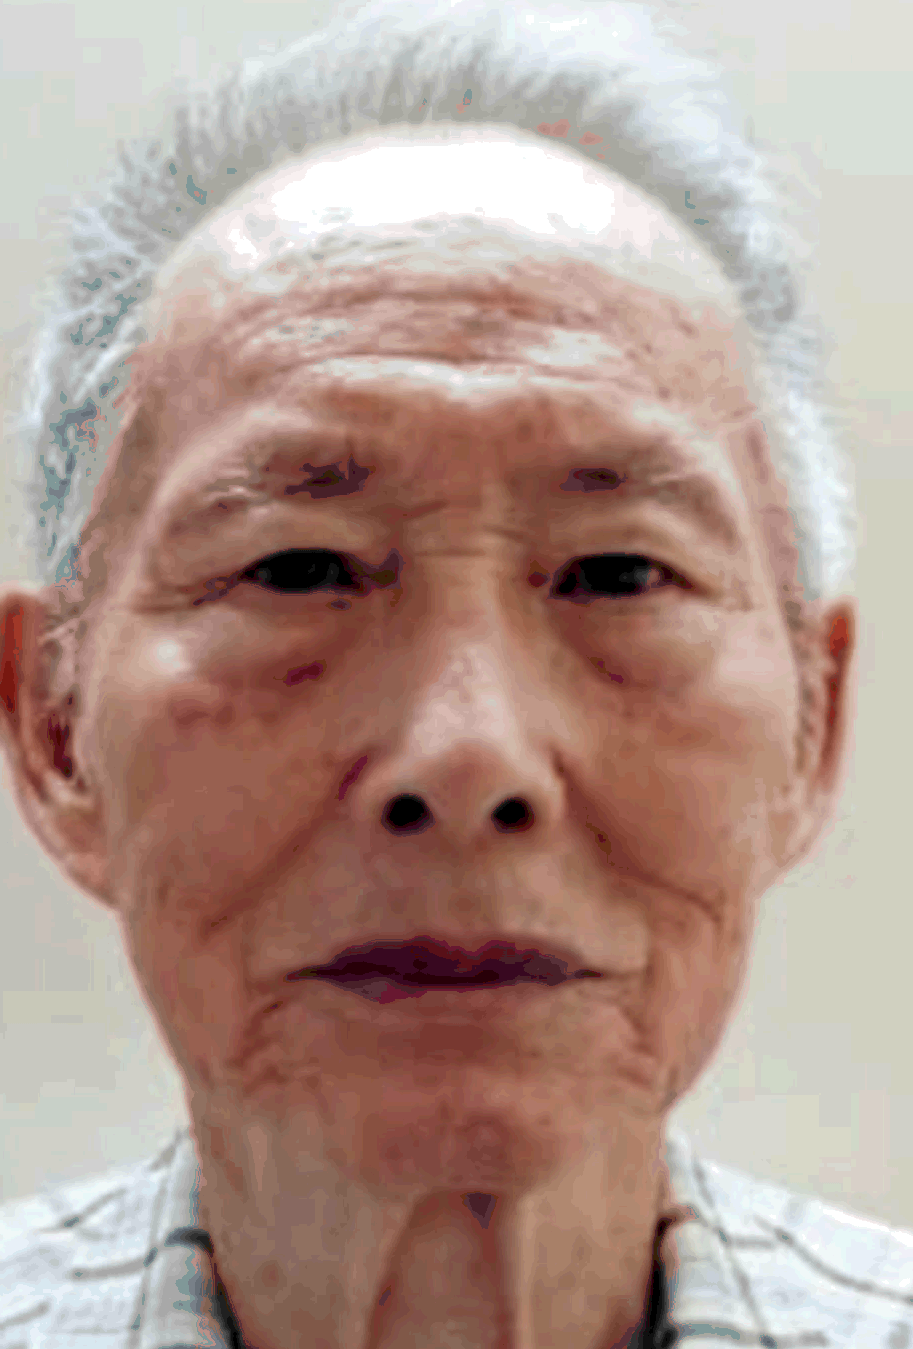 Choy Hoi-wan, aged 75, 1.65 metres tall, 50 kilograms in weight and of thin build. He has a pointed face with yellow complexion and short white hair. He was last seen wearing a green checkered shirt, blue trousers, brown shoes and carrying a red umbrella.